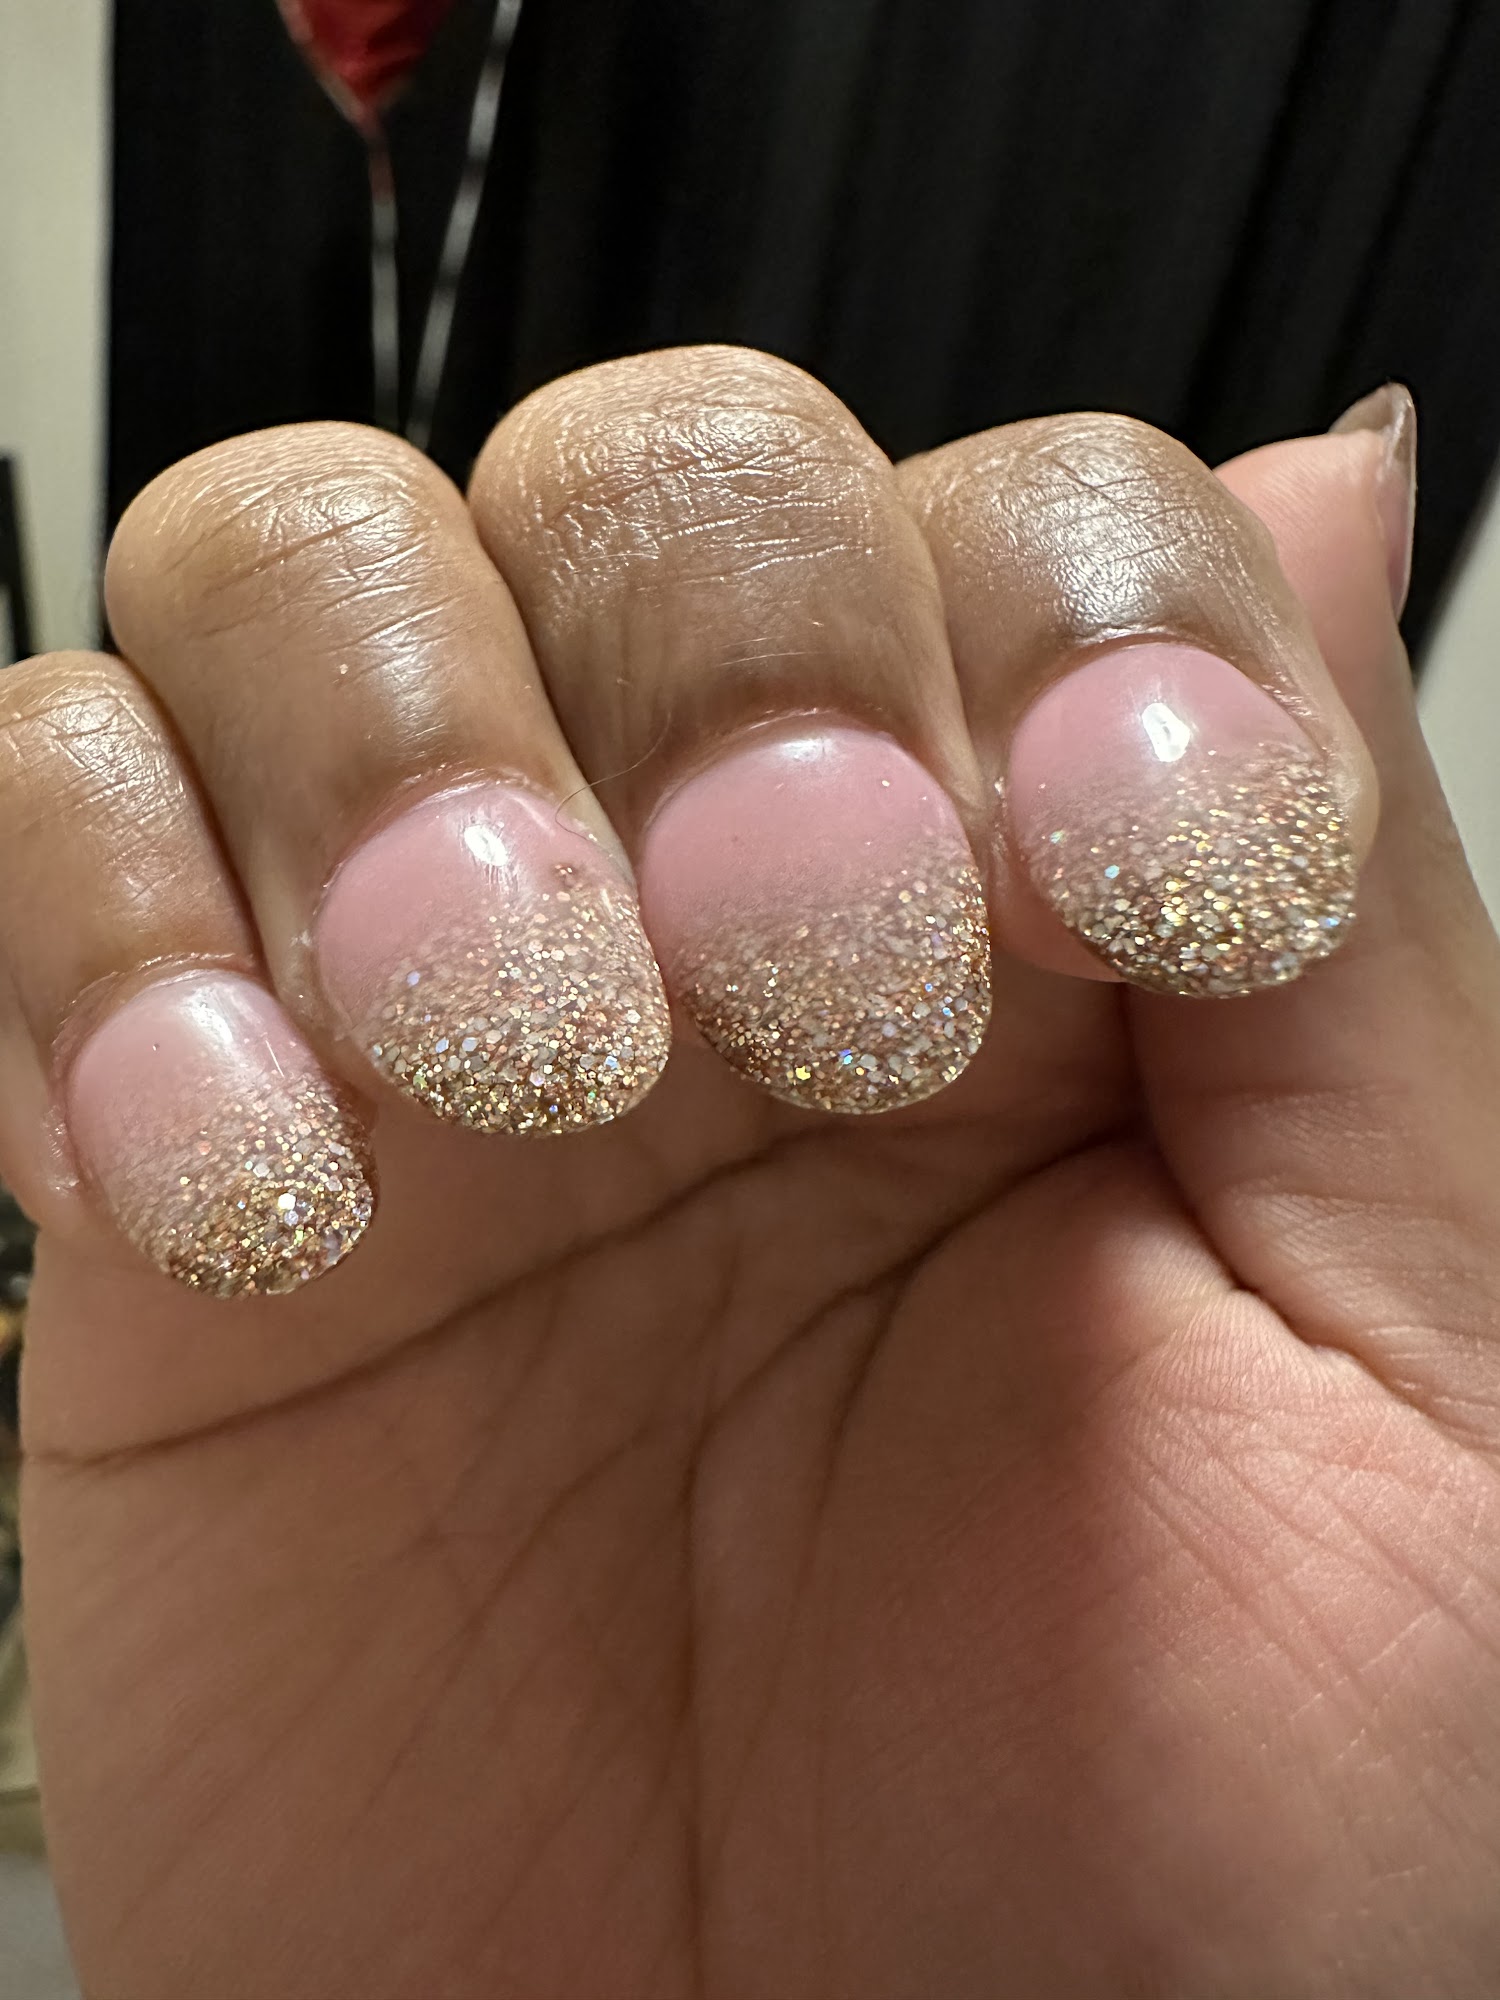 Star Nails 704 McMeans Ave, Bay Minette Alabama 36507